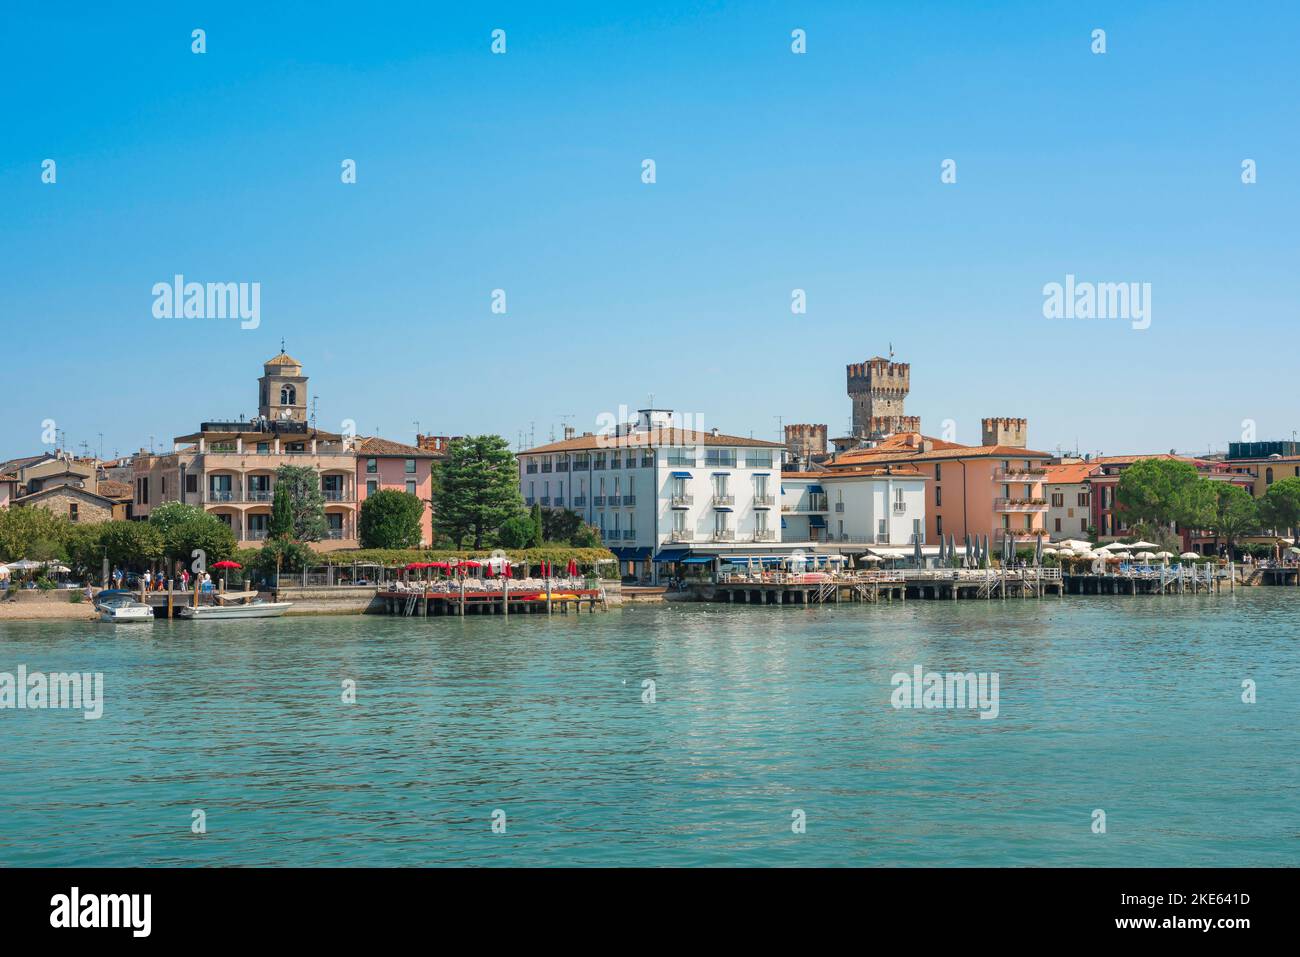 Sirmione Lake Garda, view in summer of the scenic lakeside town of Sirmione in Lake Garda, Lombardy, Italy Stock Photo